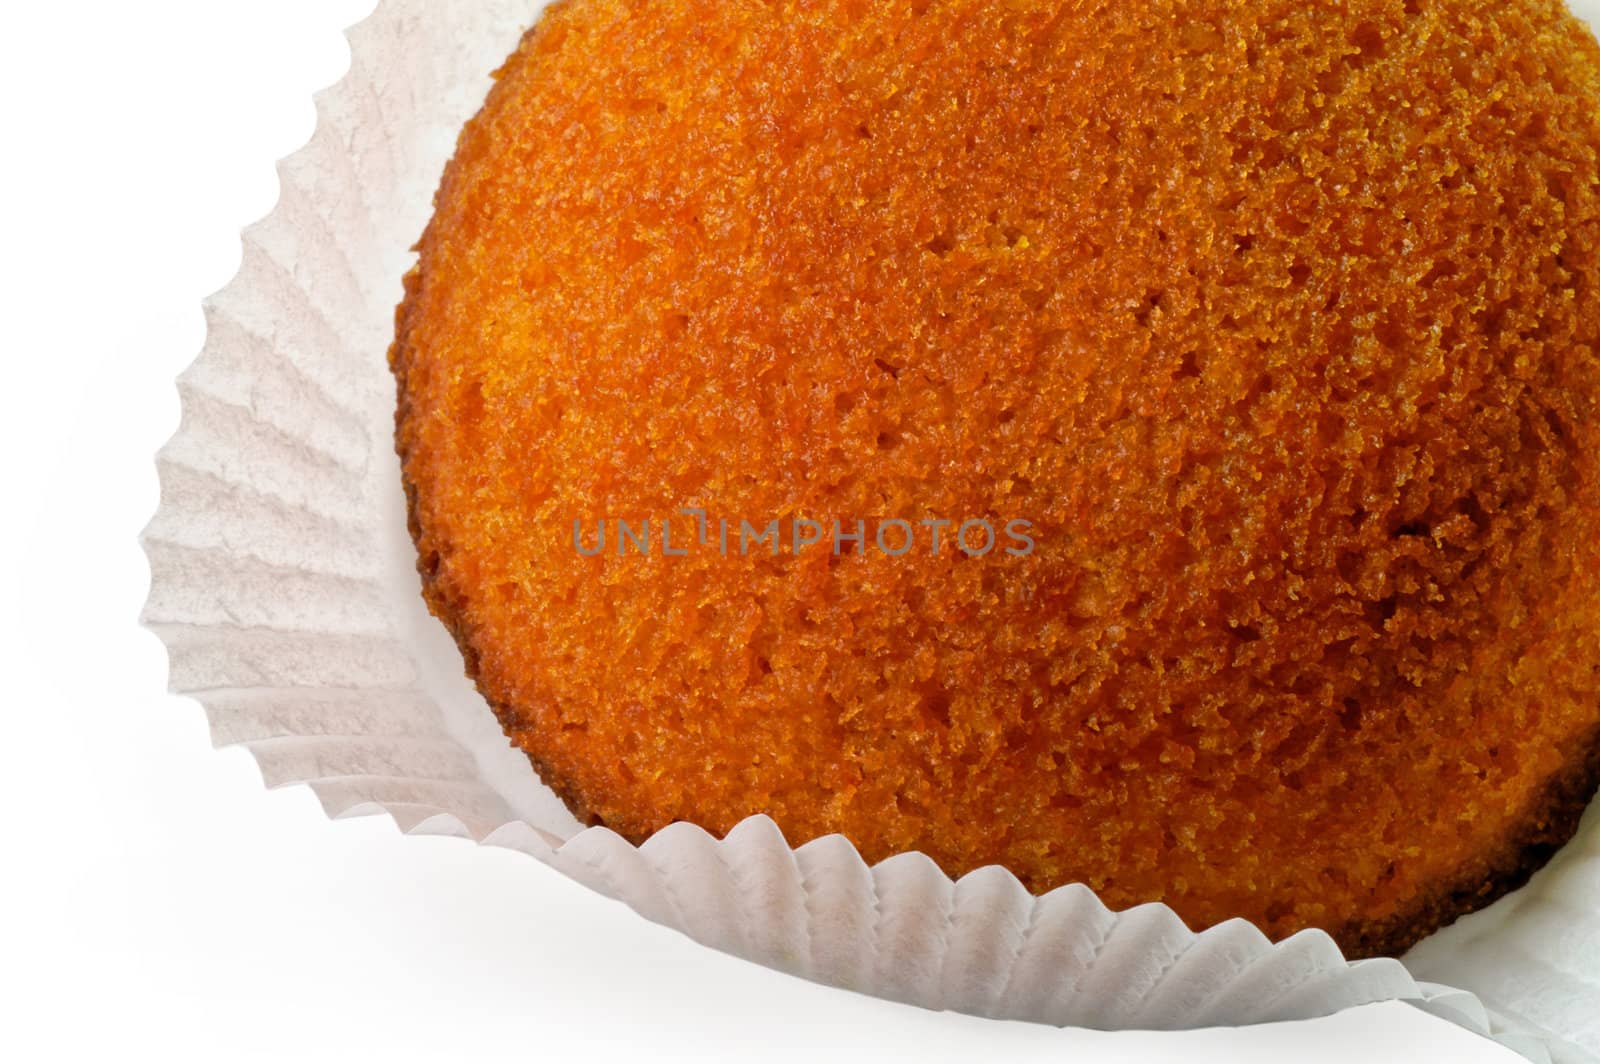 Carrot and orange cookies closeup 2 with clipping path by Laborer